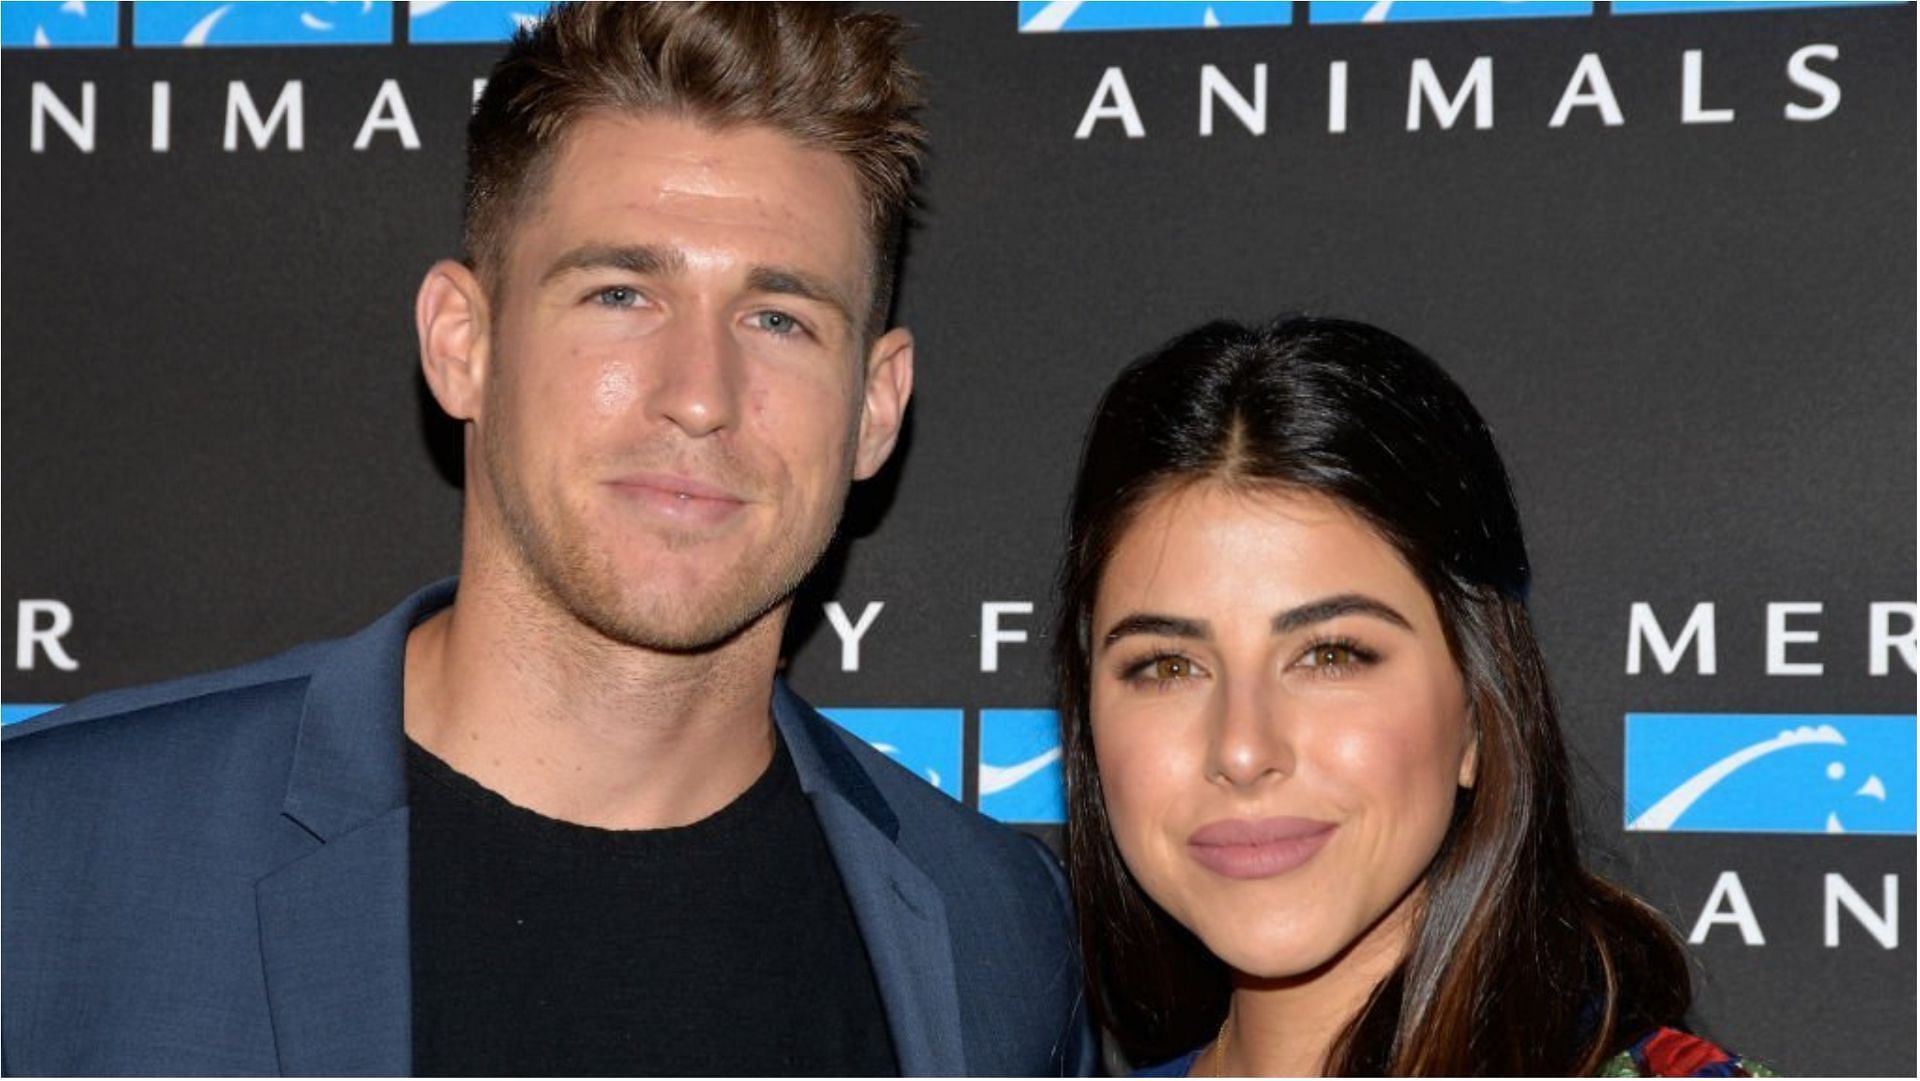 Daniella Monet and Andrew Gardner got engaged in 2017 (Image via Michael Tullberg/Getty Images)